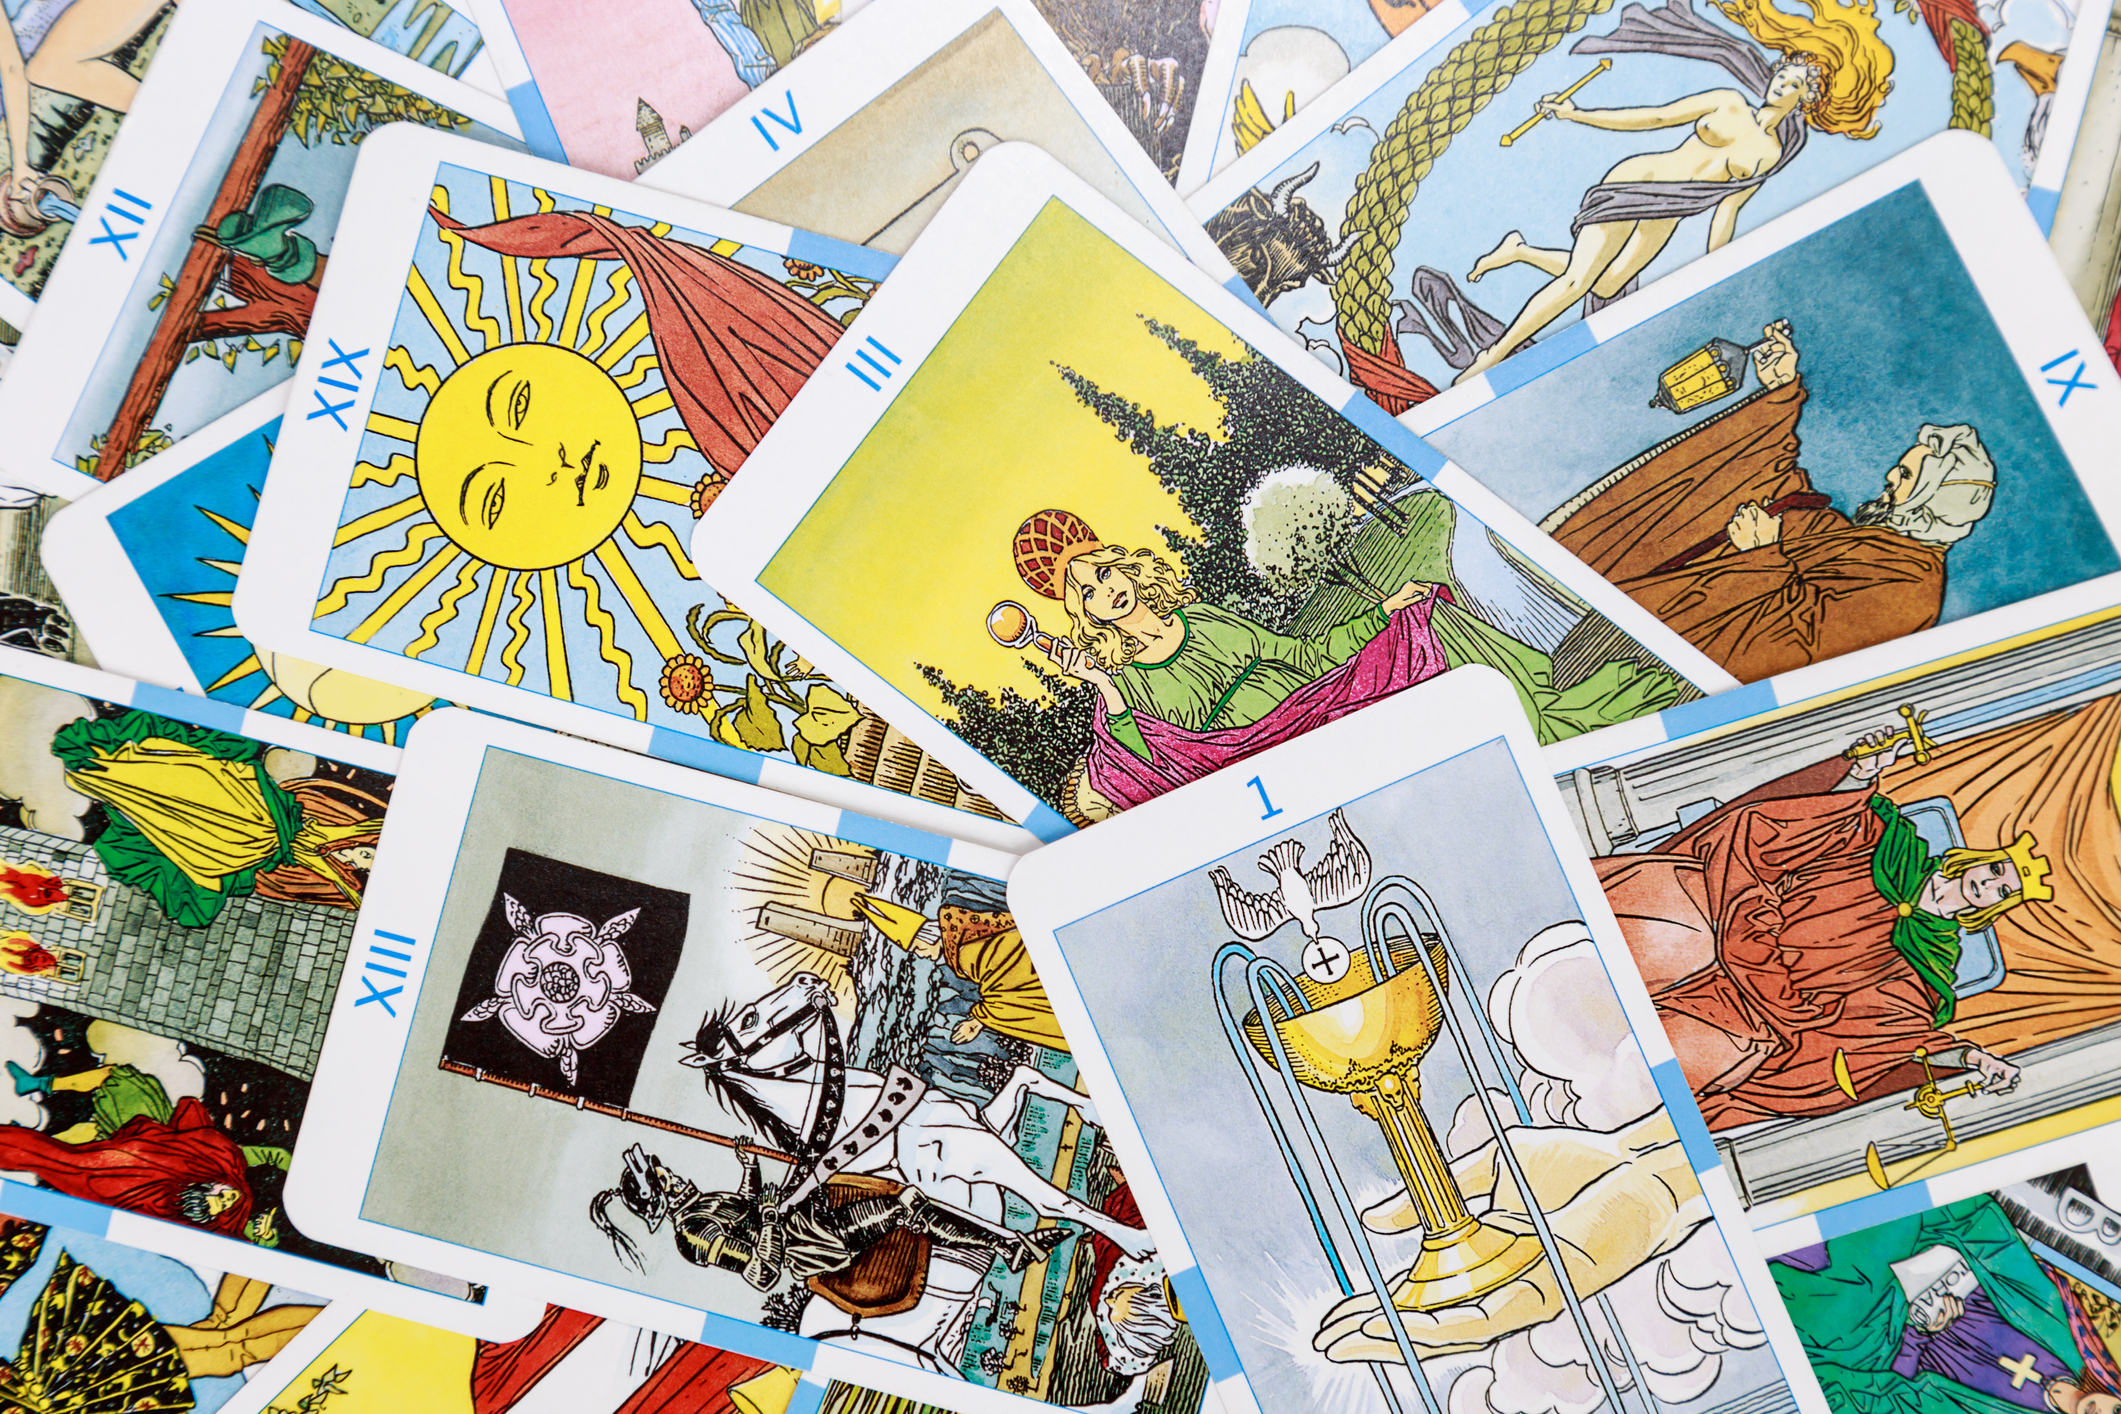 Your Weekly Tarot Horoscope Contains An Important Clue About Your Future, So Pay Attention